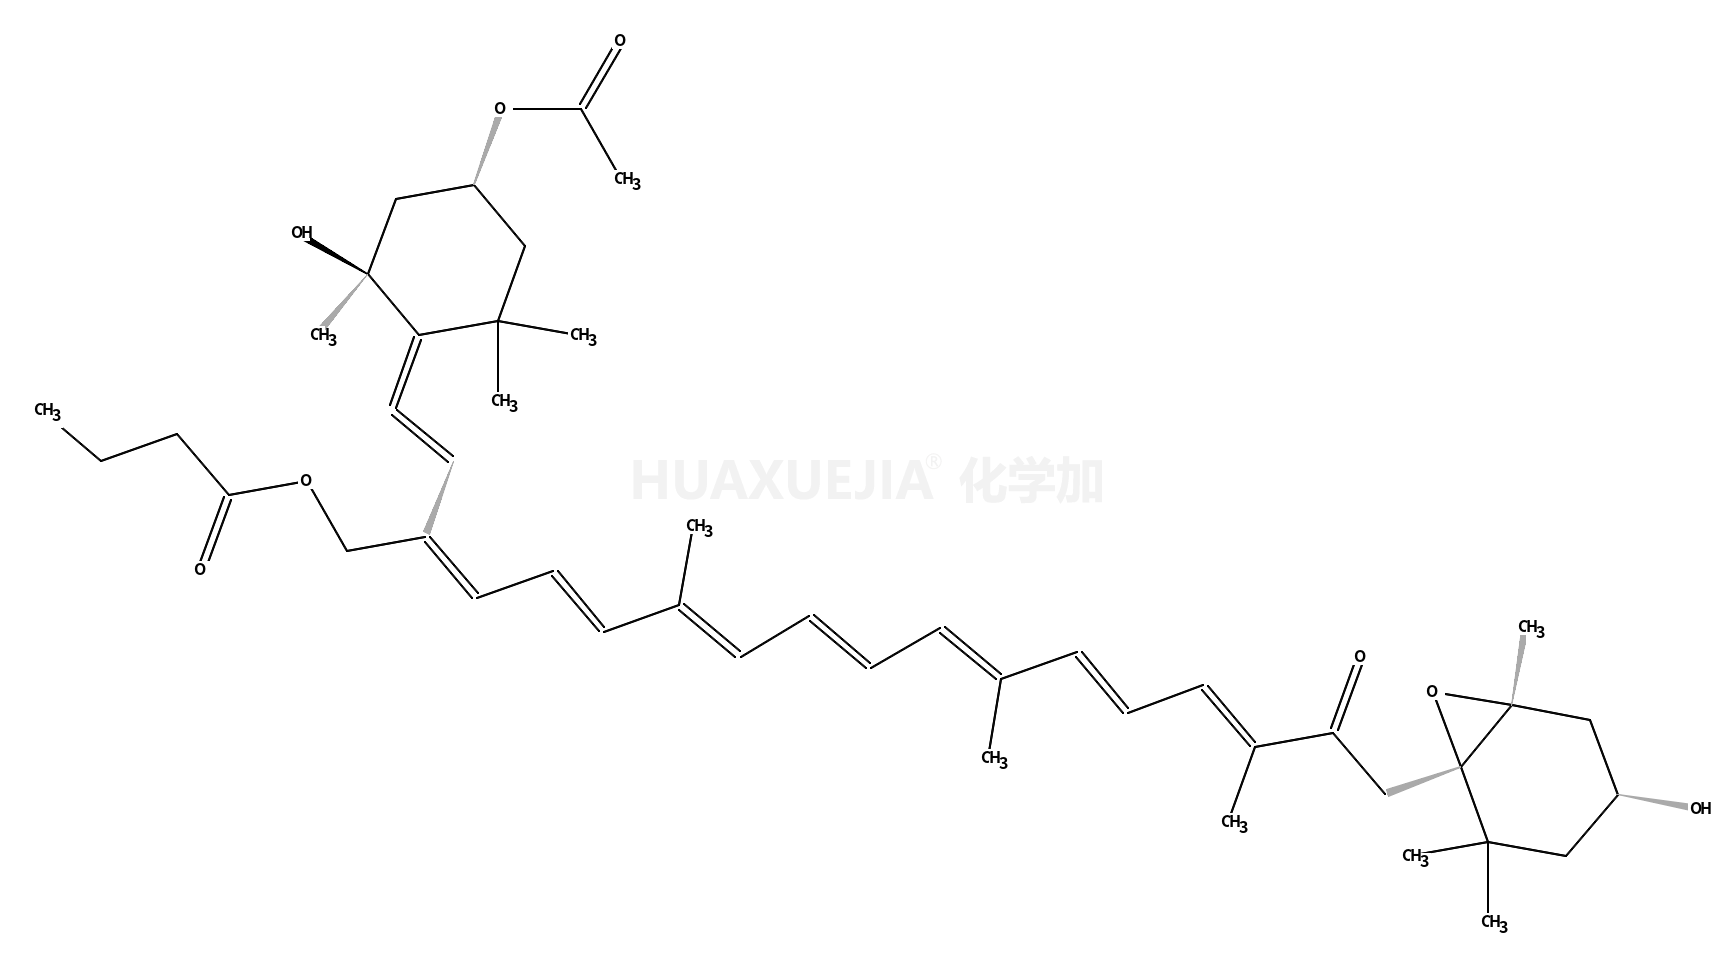 BUT-FUCOXANTHIN, 19'-(AS) (In Solution)